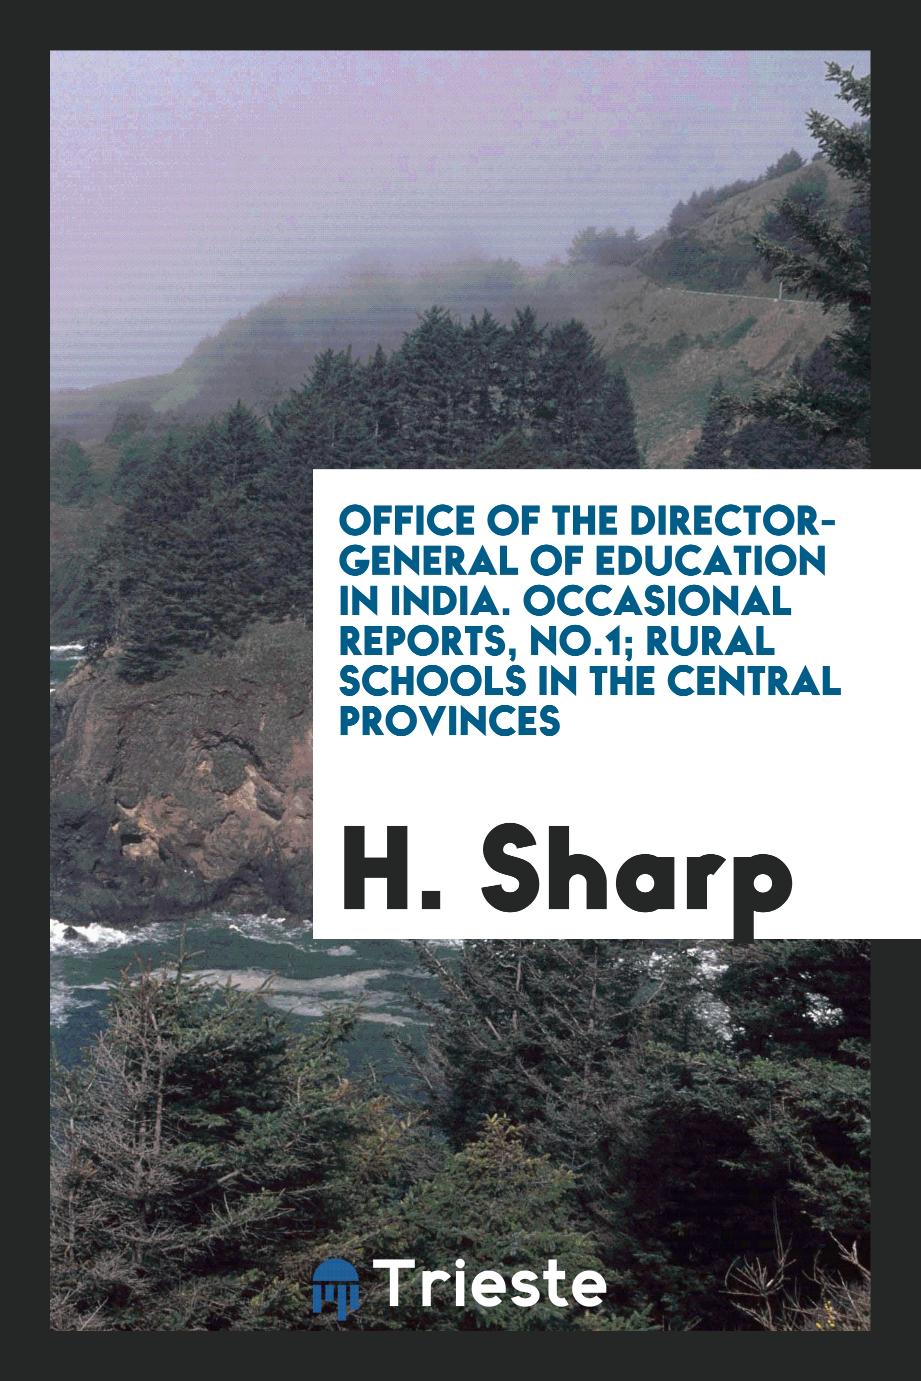 Office of the Director-General of Education in India. Occasional Reports, No.1; Rural Schools in the Central Provinces